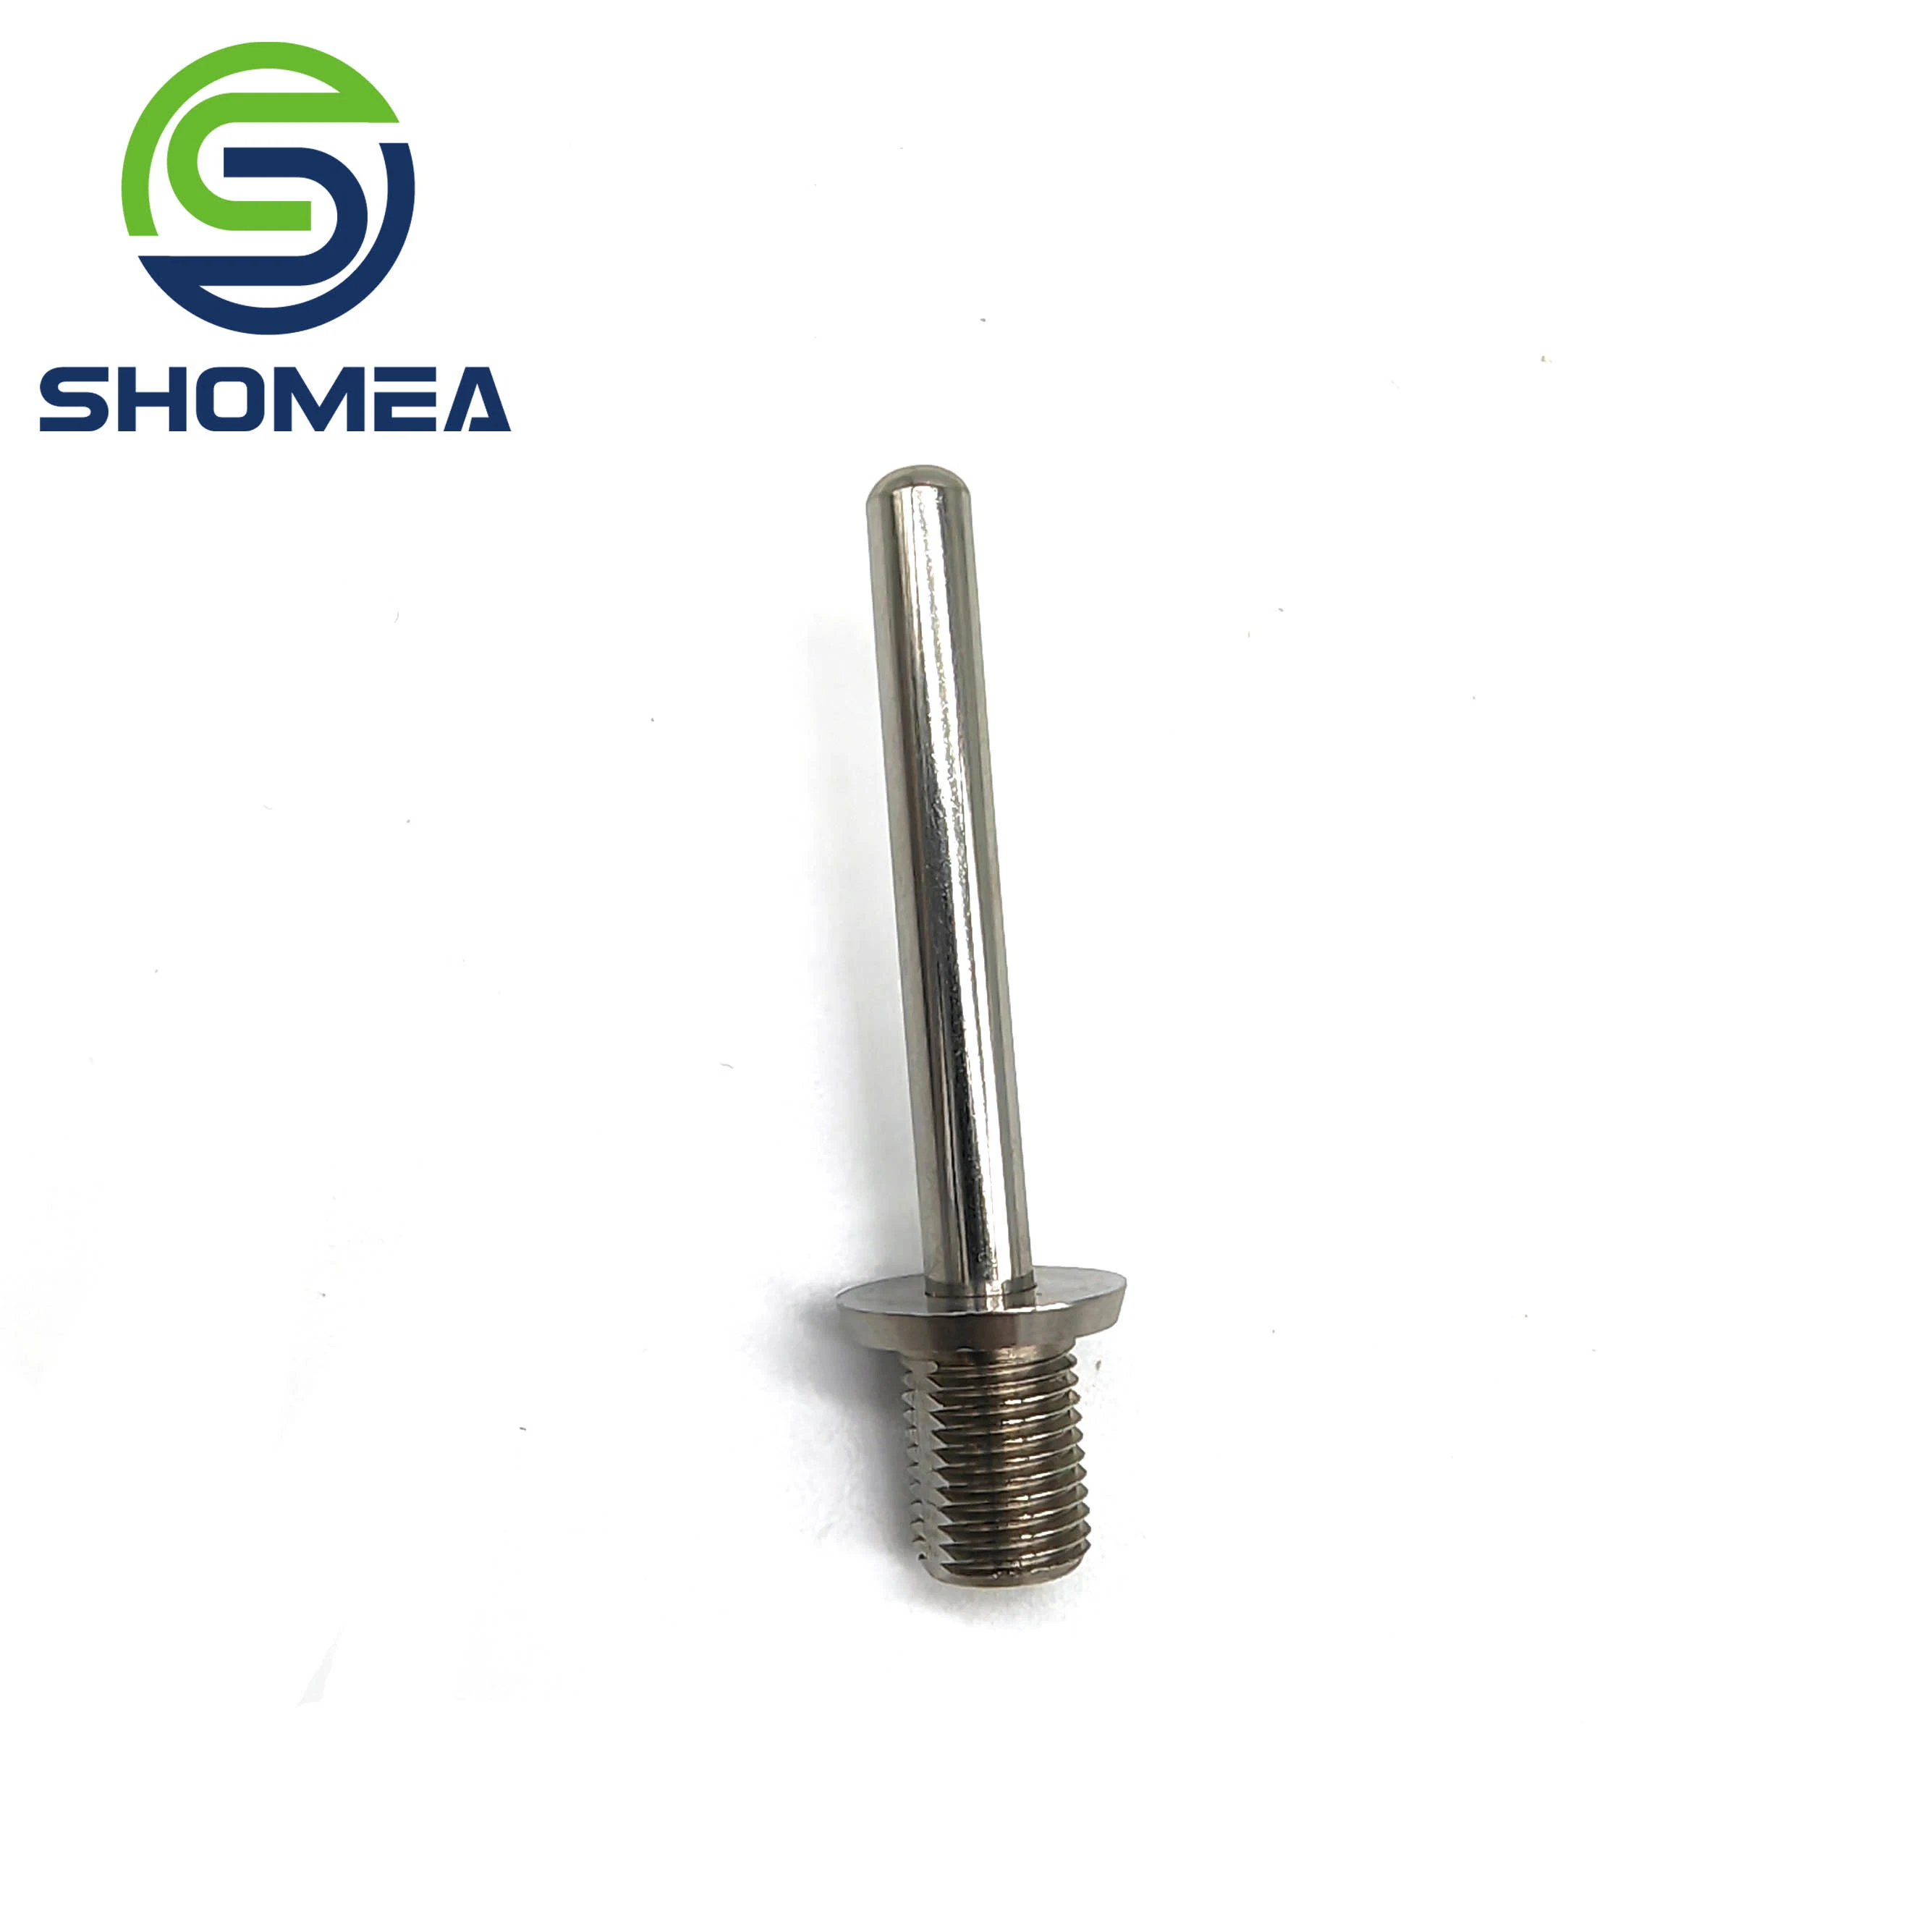 Shomea Customized Stainless Steel Rtd Temperature Probe Sensor with Male Thread